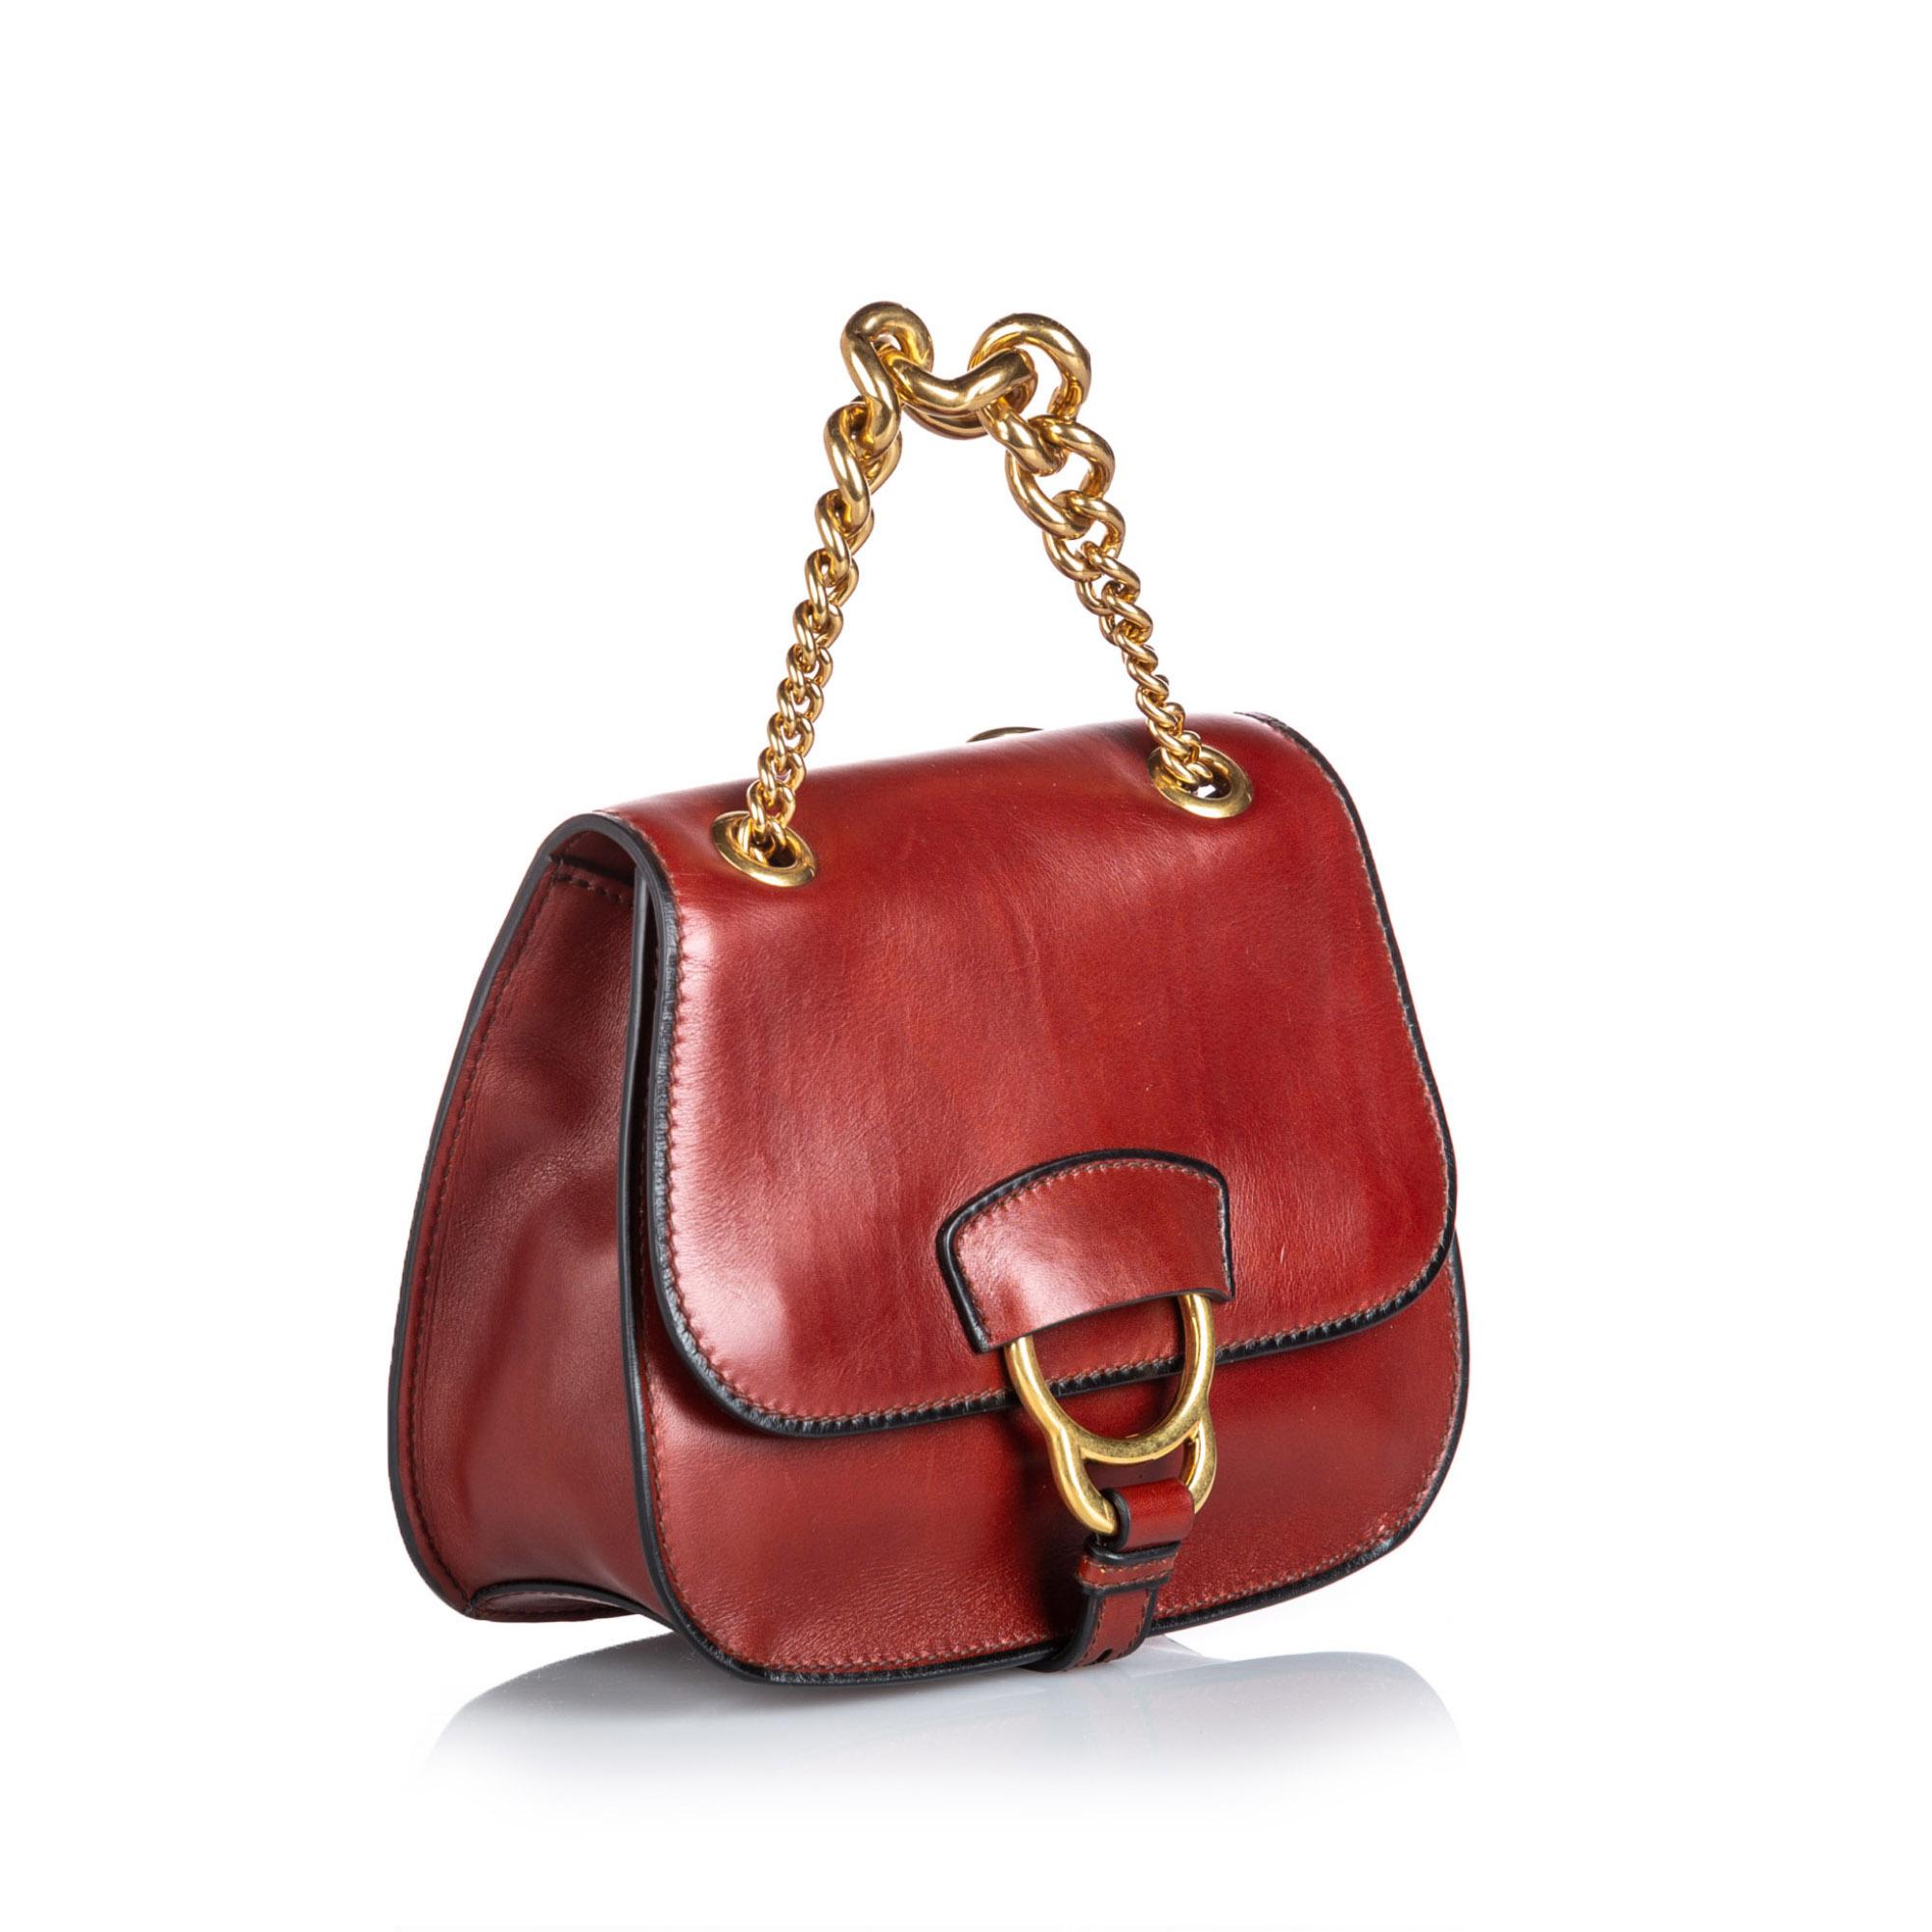 The Dahlia features a leather body, flat strap with gold toned chain, top flap with magnetic snap button closure, and an interior slip pocket. It carries as A condition rating.

Inclusions: 
Dust Bag
Authenticity Card
Dimensions:
Length: 18.00